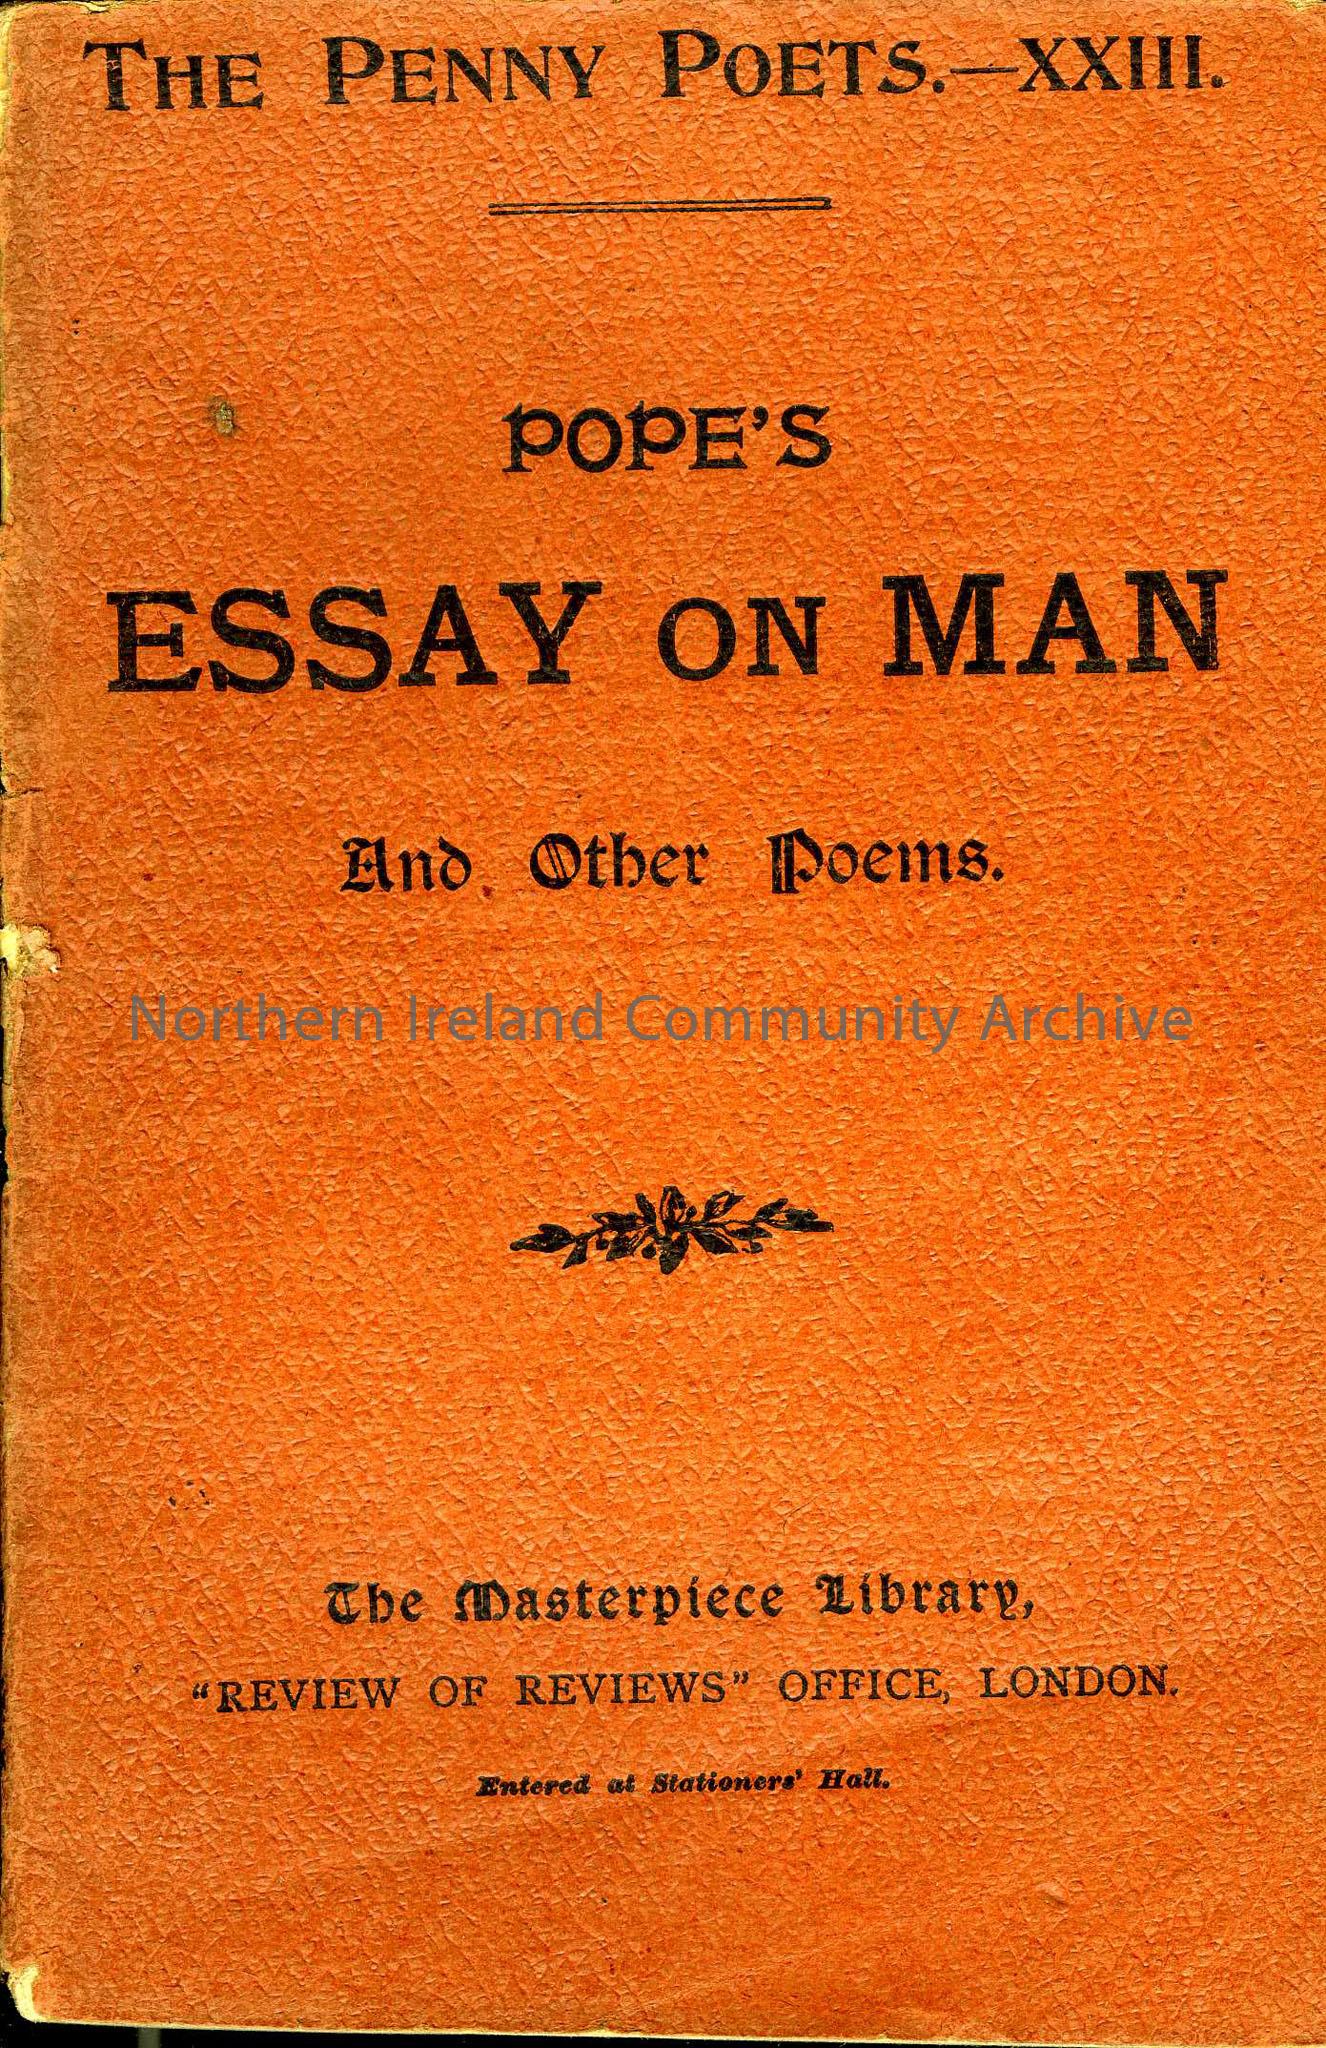 Pope’s Essay on Man and other Poems